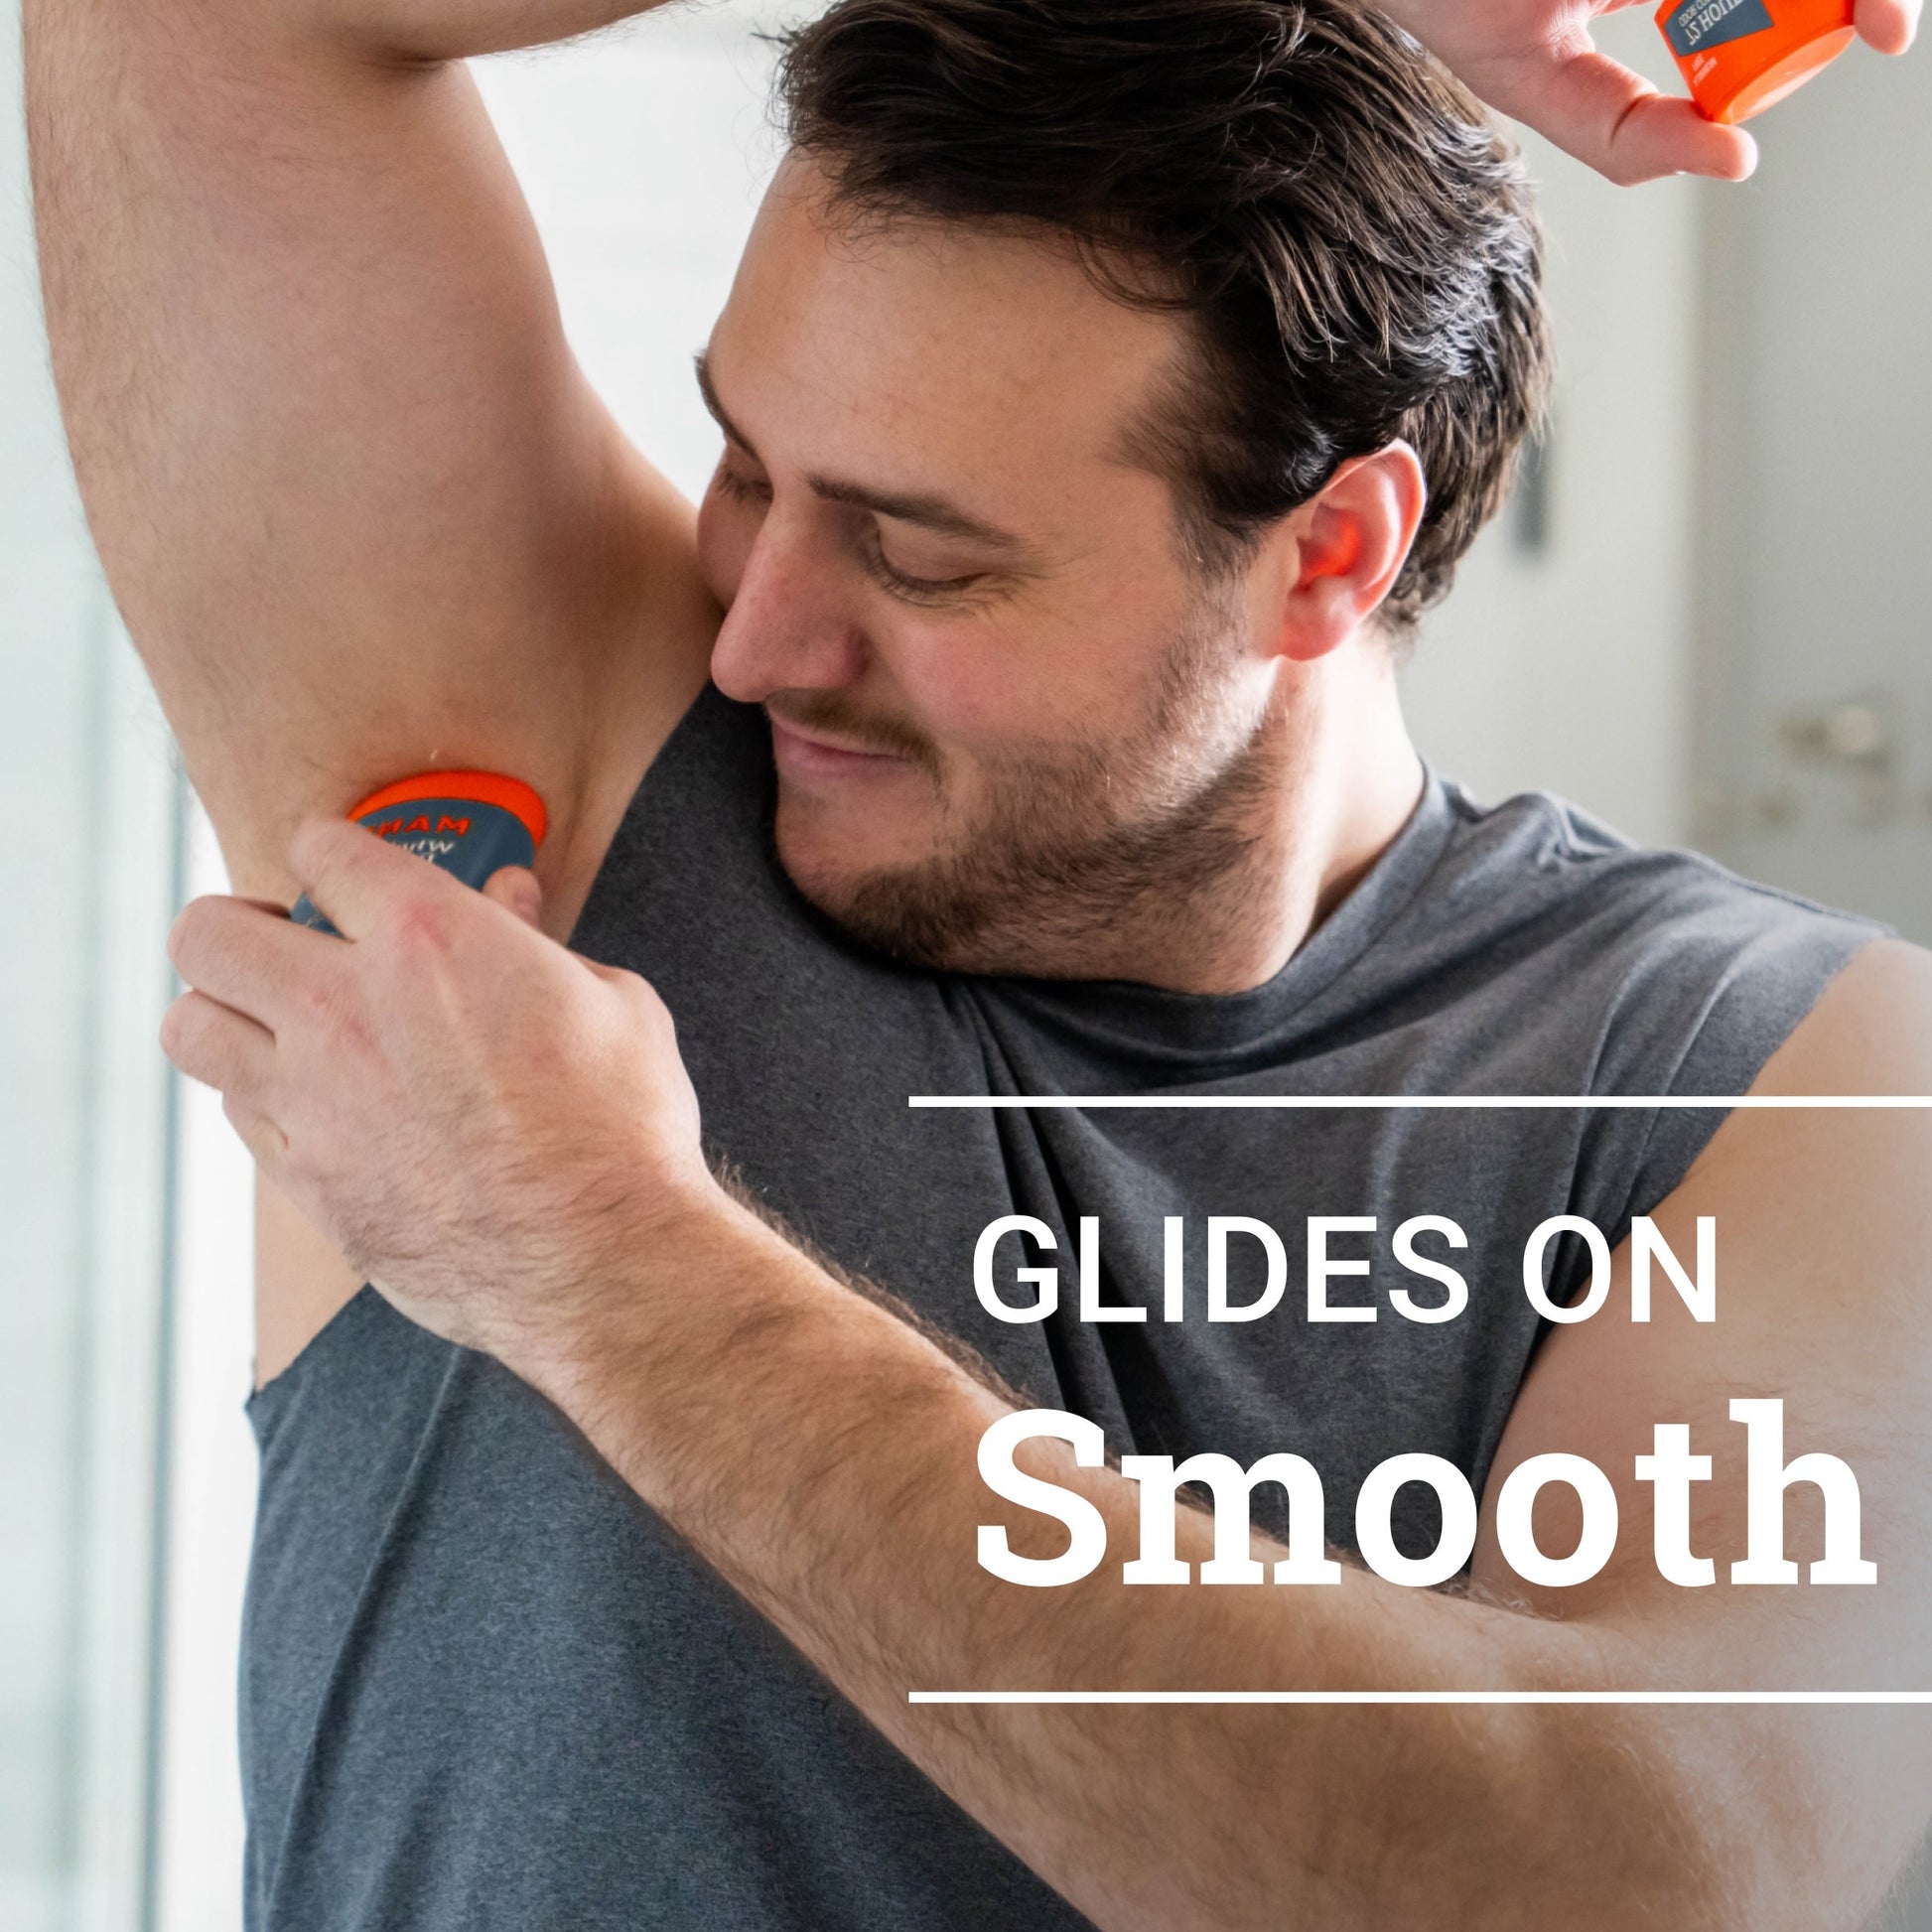 man smiling while applying mt fuji solid stick deodorant to armpit with text: glides on smooth